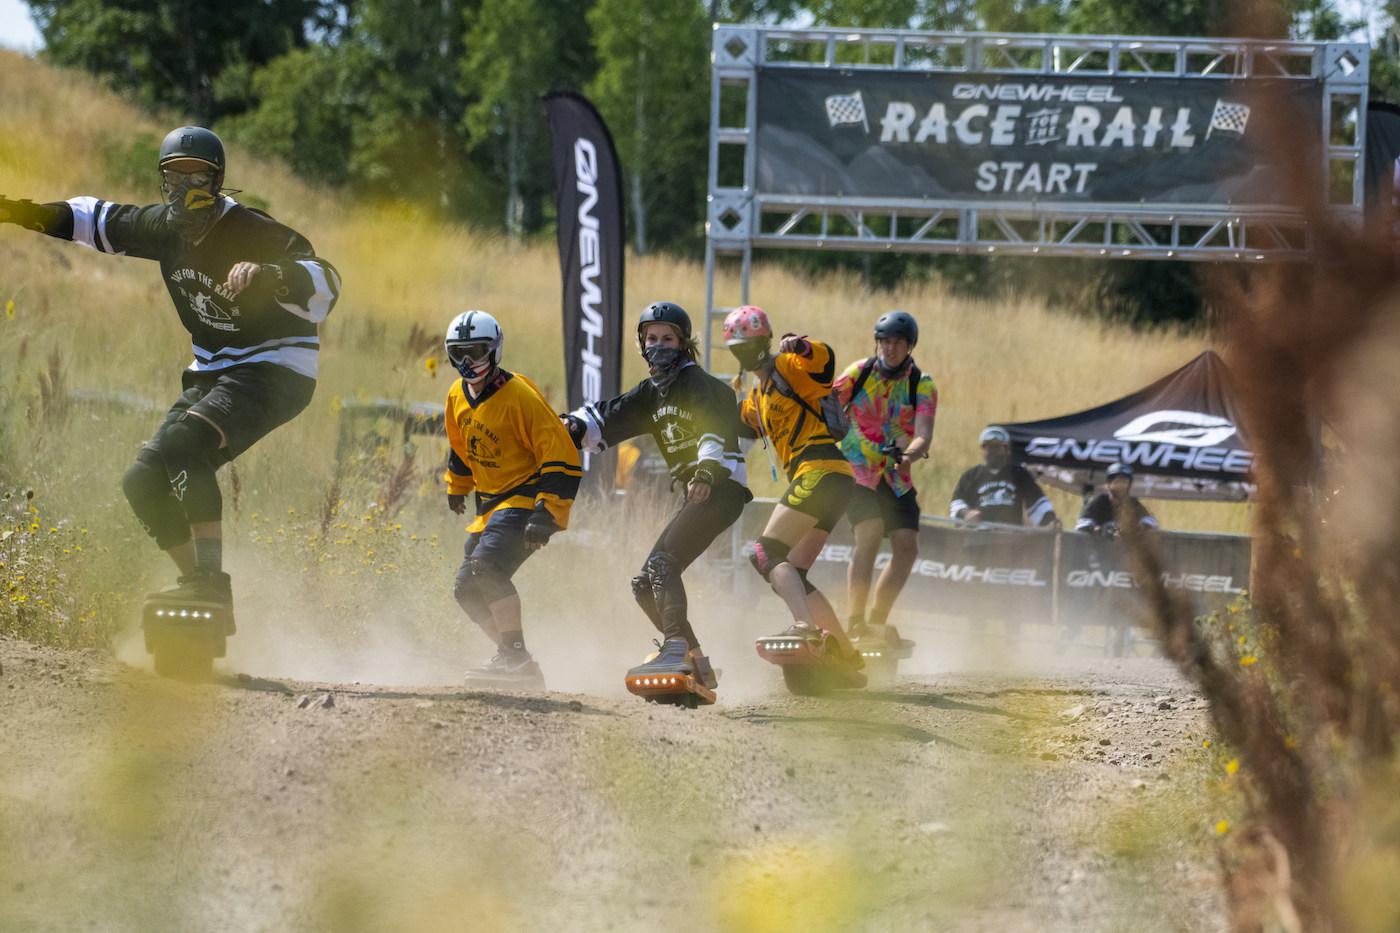 Onewheel's Race For The Rail World Championships Promises To Be Must